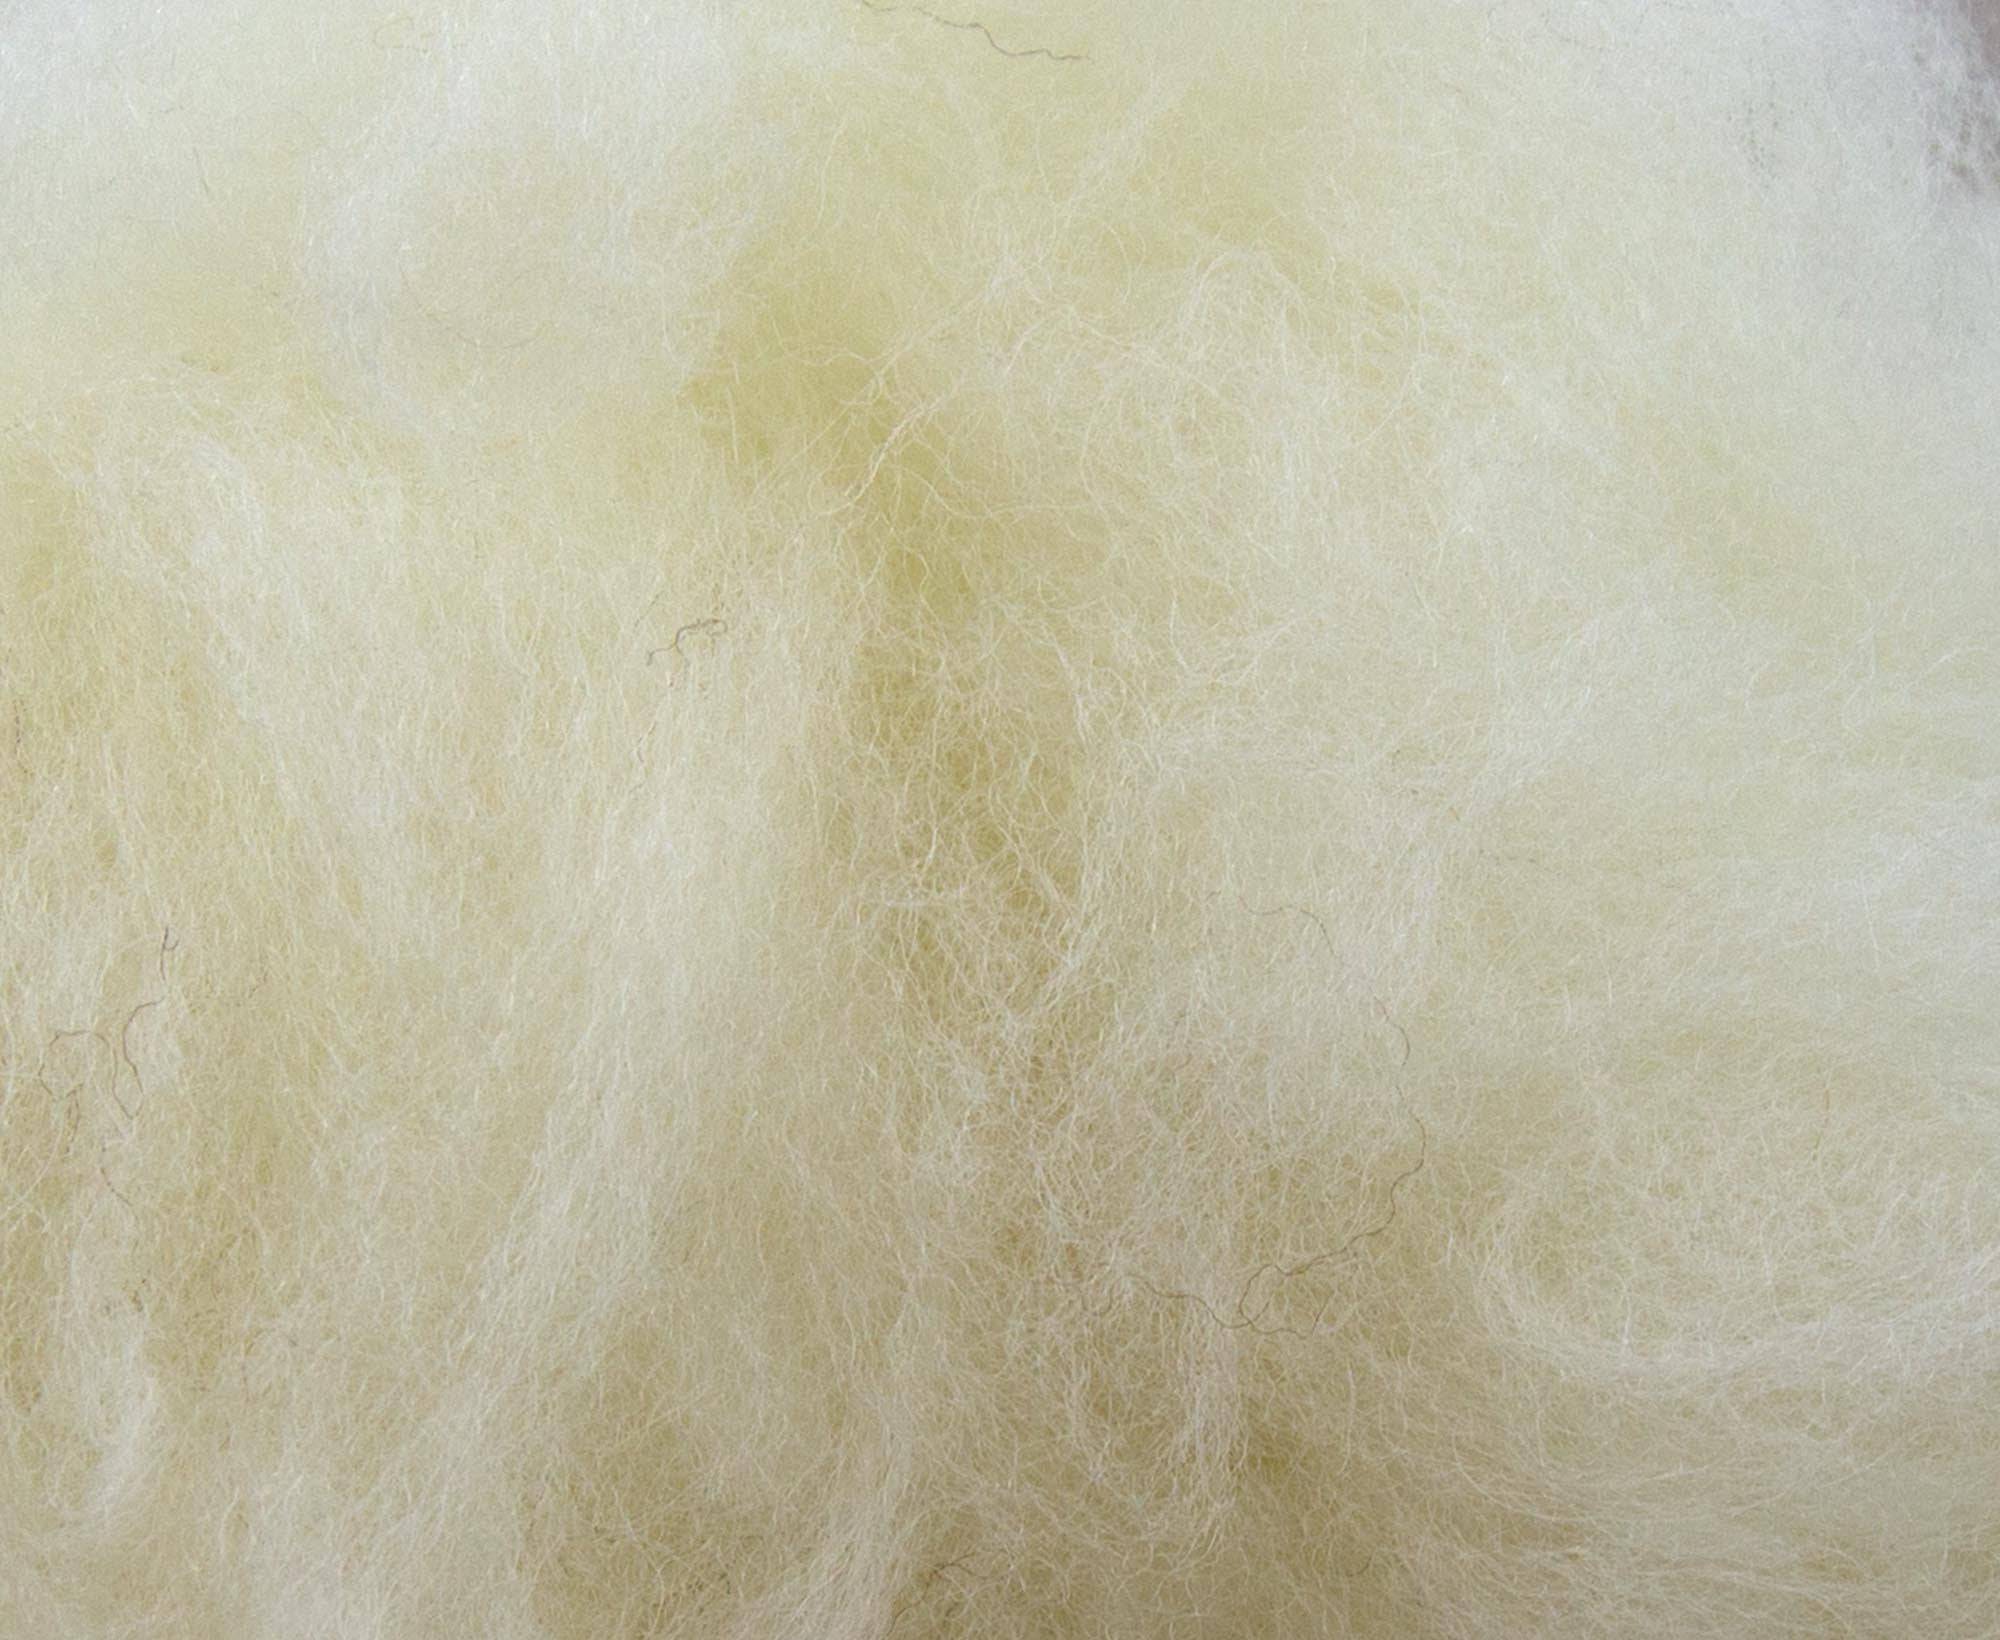 Carded White Lambswool - World of Wool